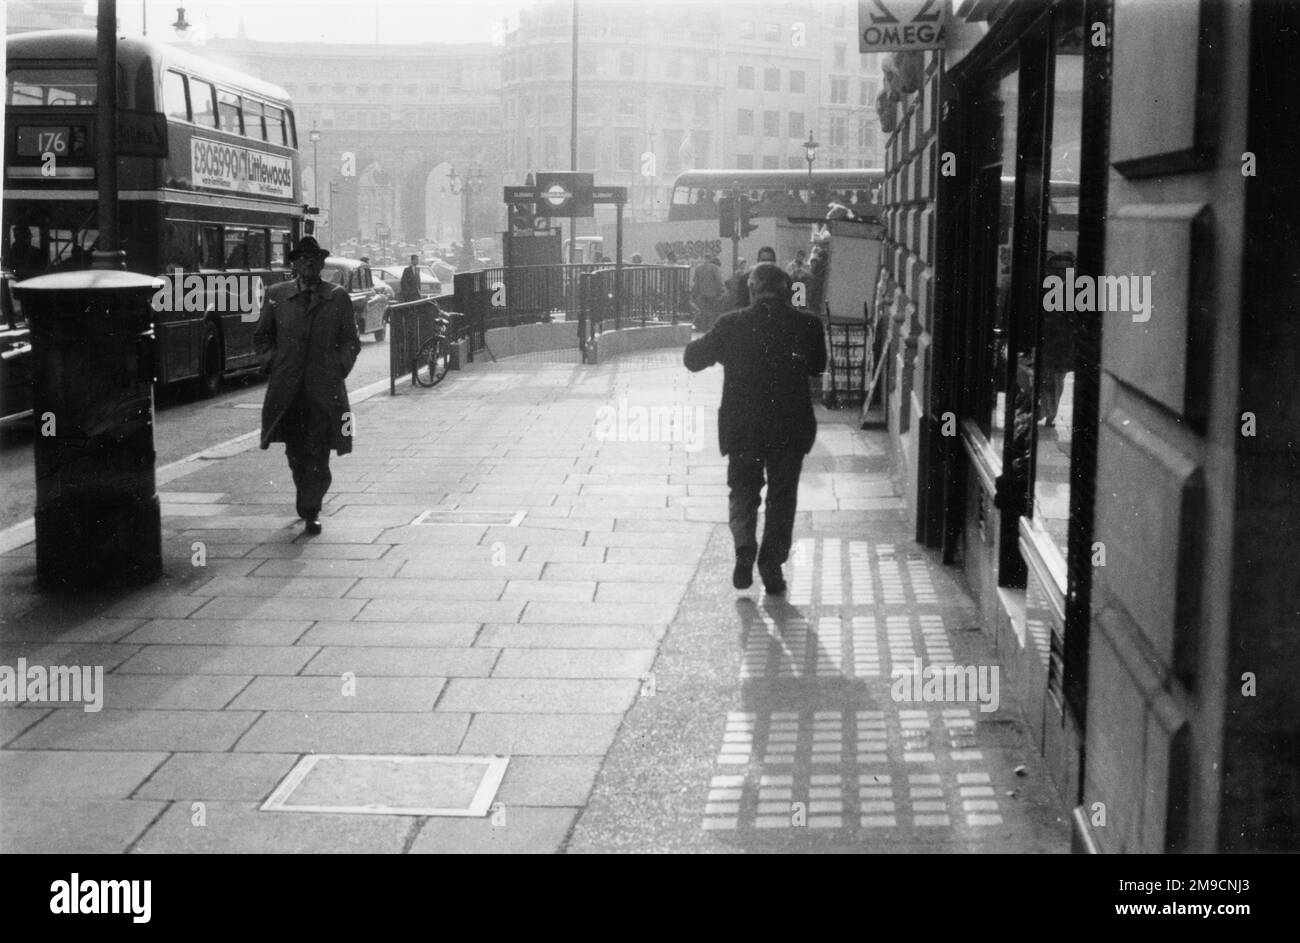 Pedestrians walking along the pavement at the very western end of The Strand, London, close to Trafalgar Square. Admiralty Arch can be seen in the background. Stock Photo